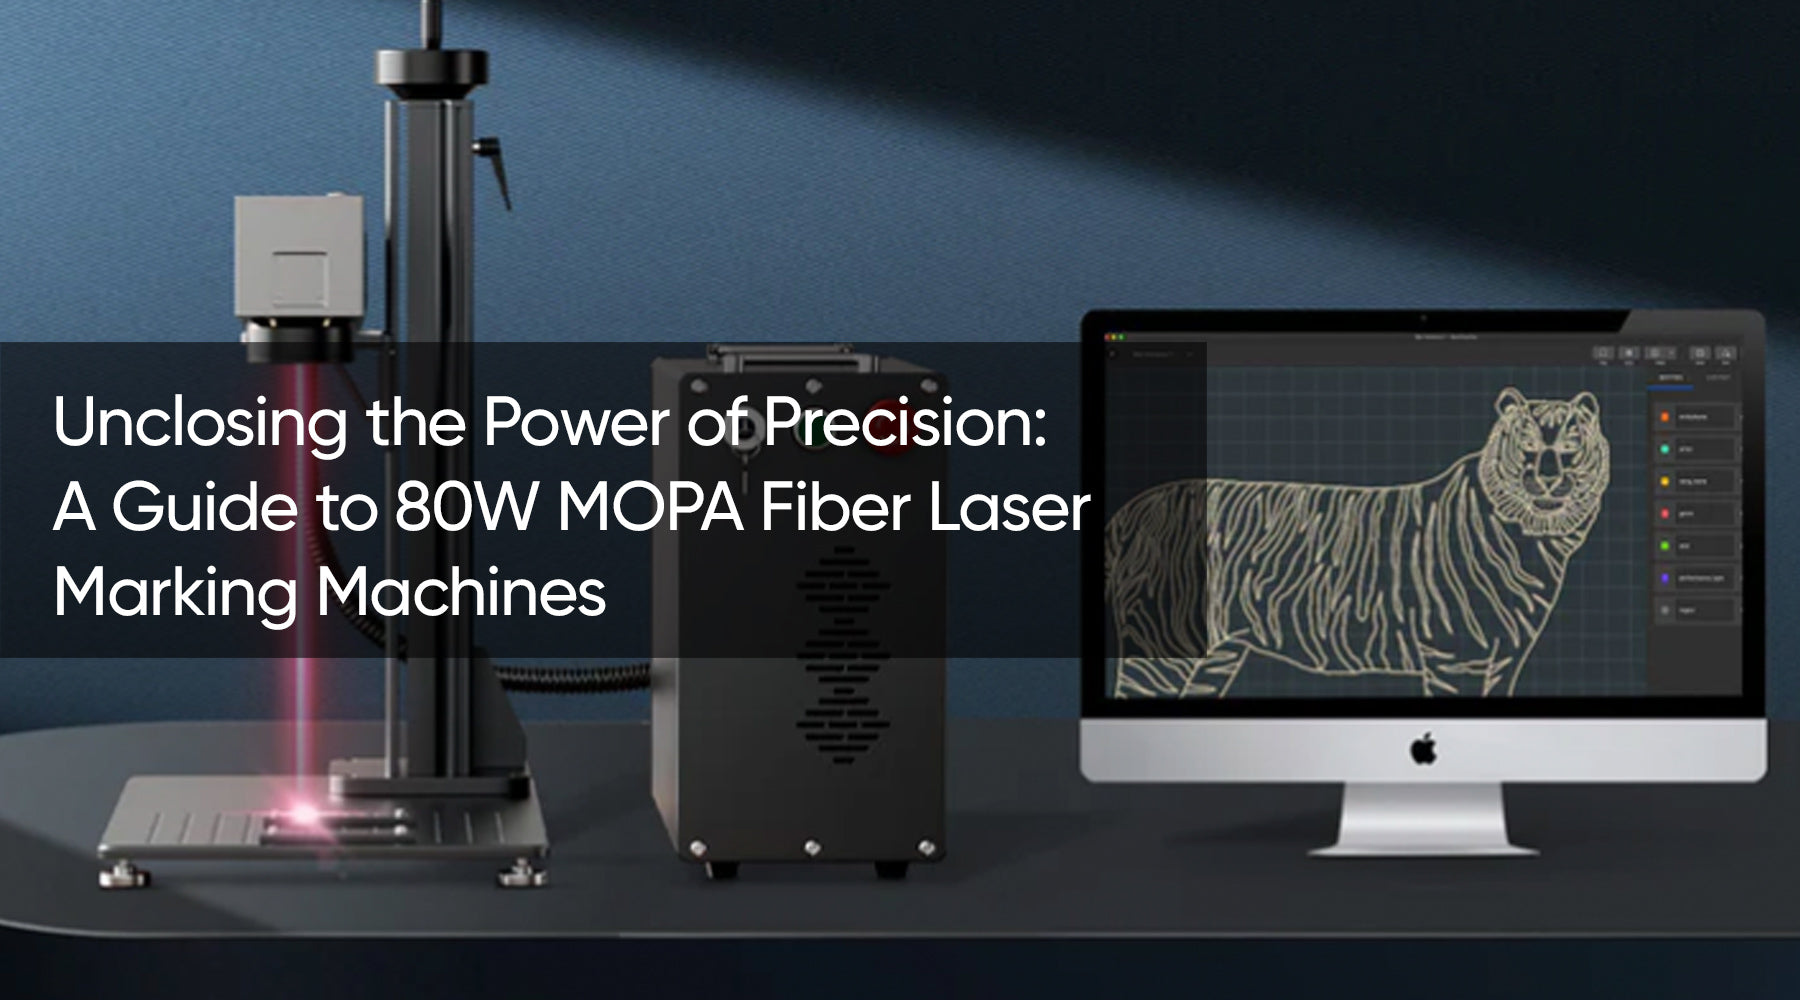 Unclosing the Power of Precision: A Guide to 80W MOPA Fiber Laser Marking Machines